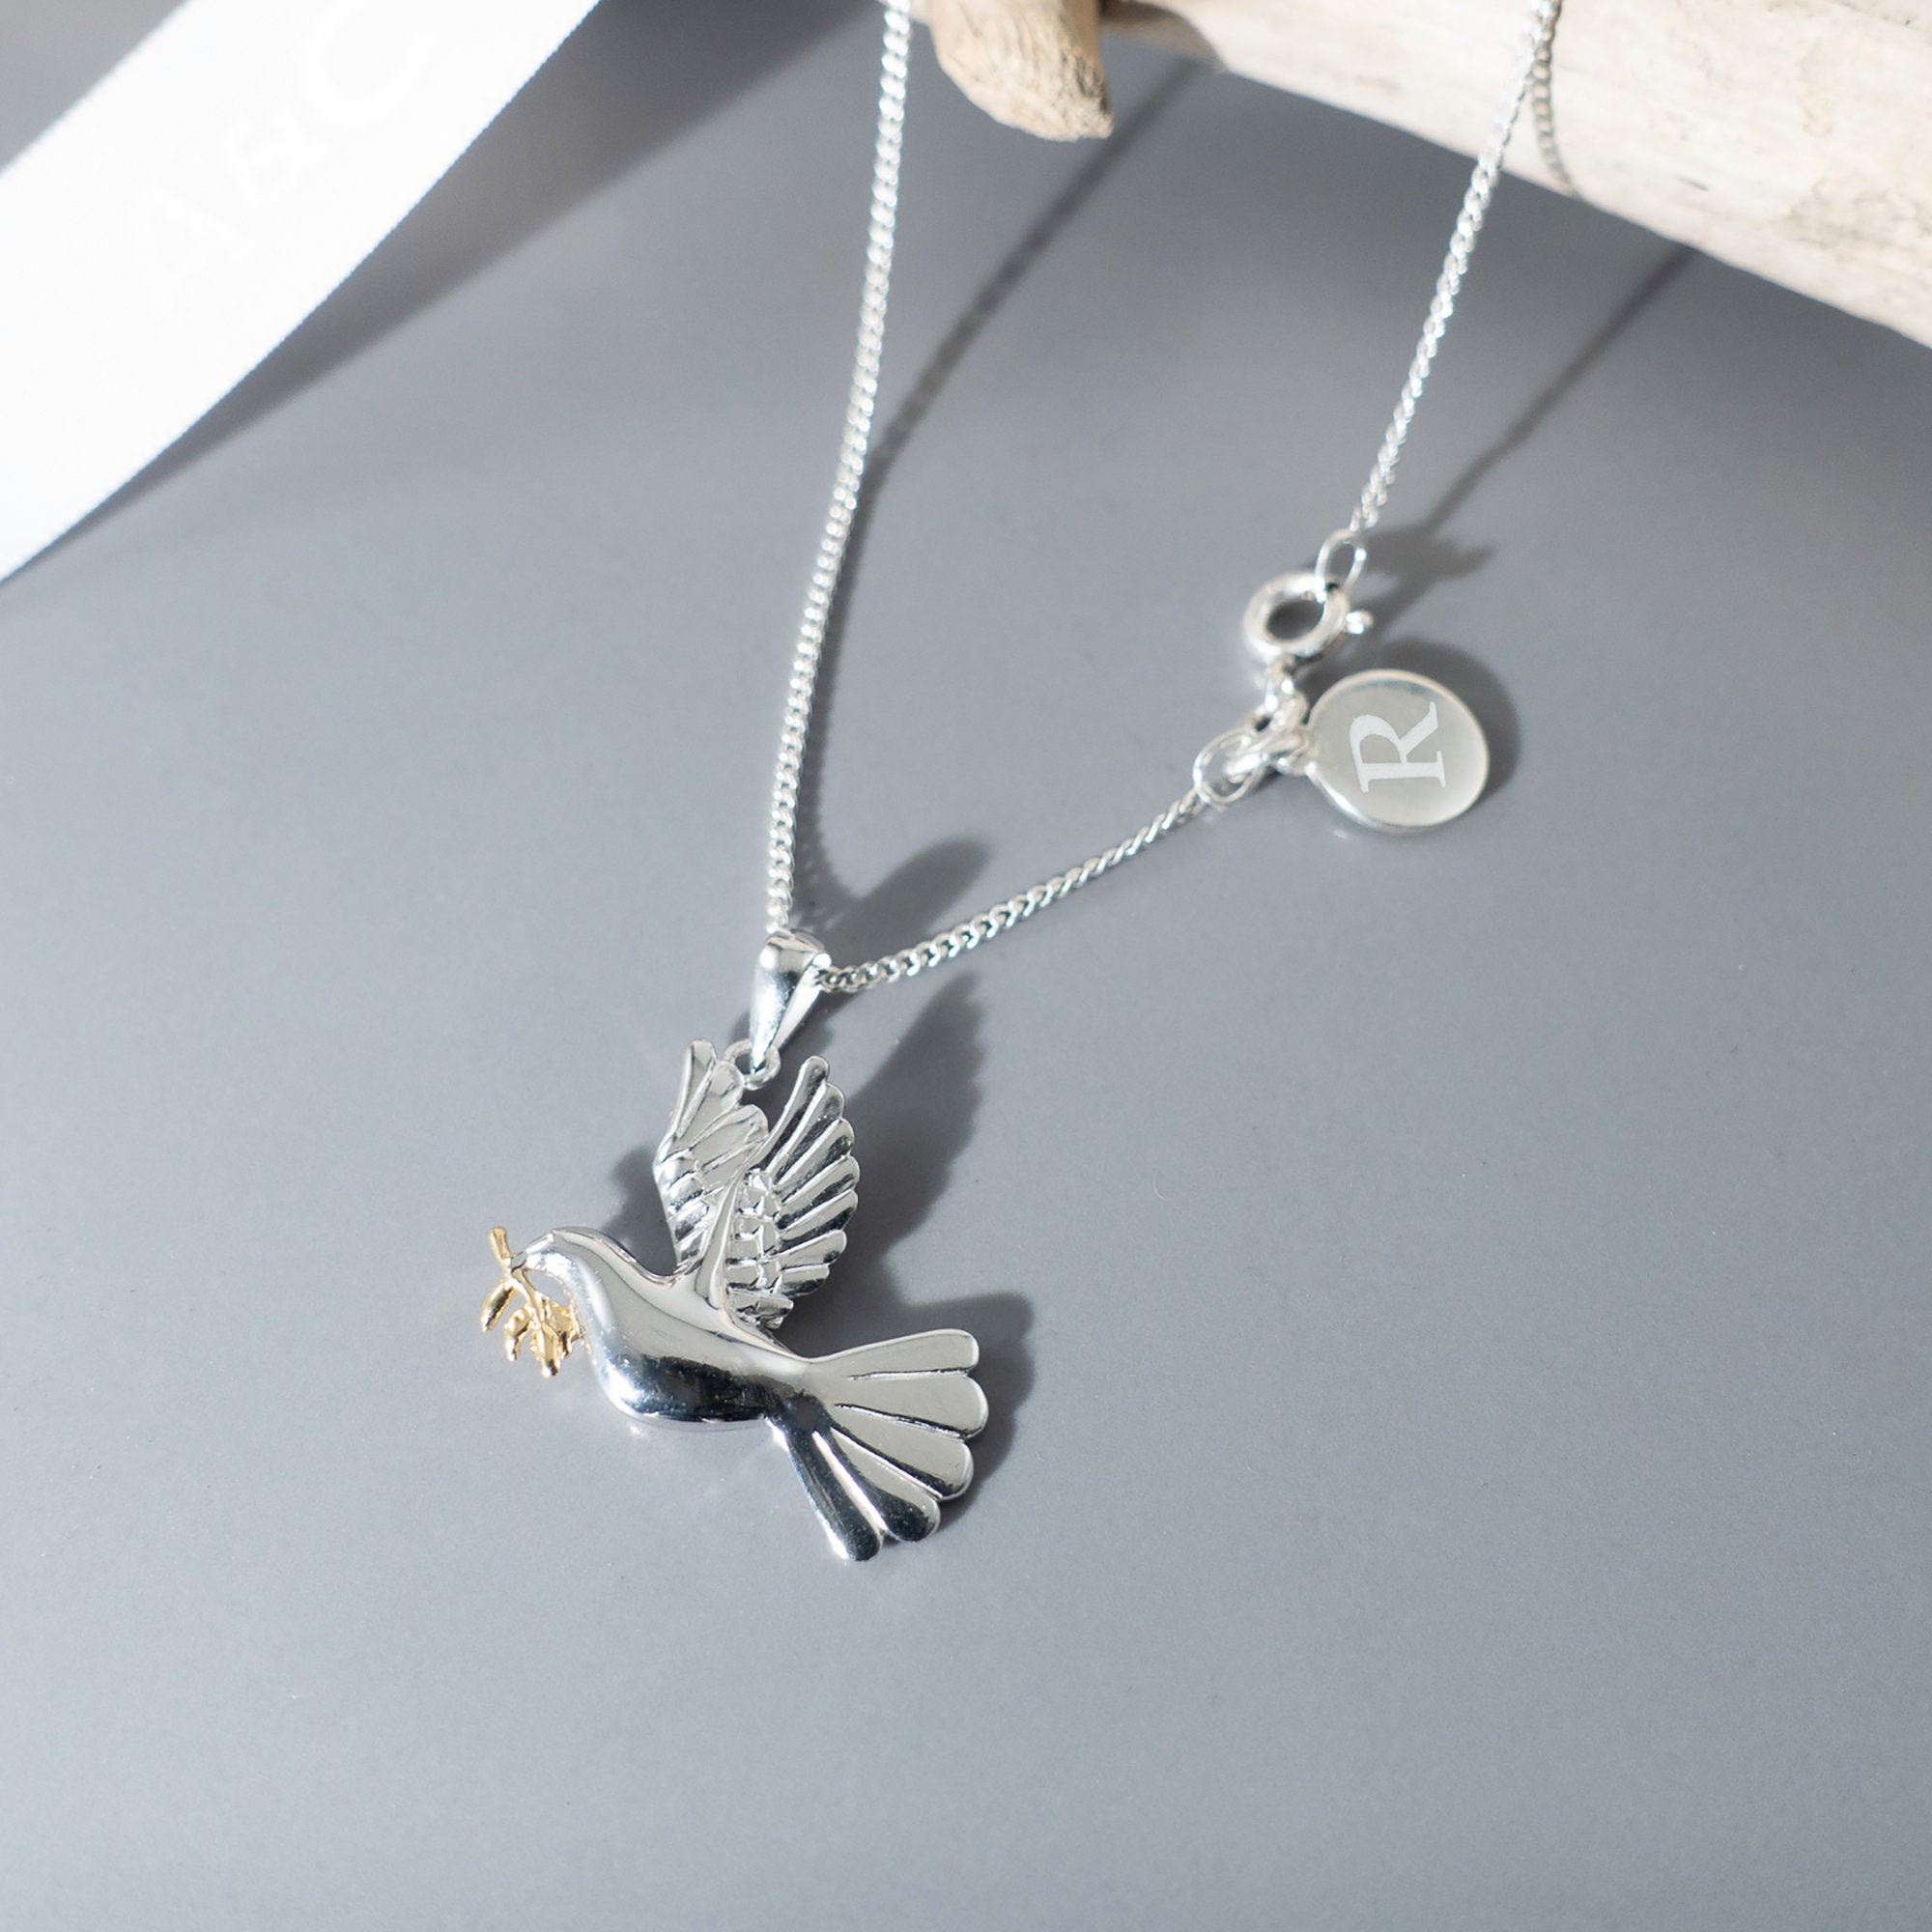 Buy Dove Necklace in Sterling Silver, Animal Pendant, Bird Jewellery, Dove  of Peace, Dove and Olive Branch, Online in India - Etsy